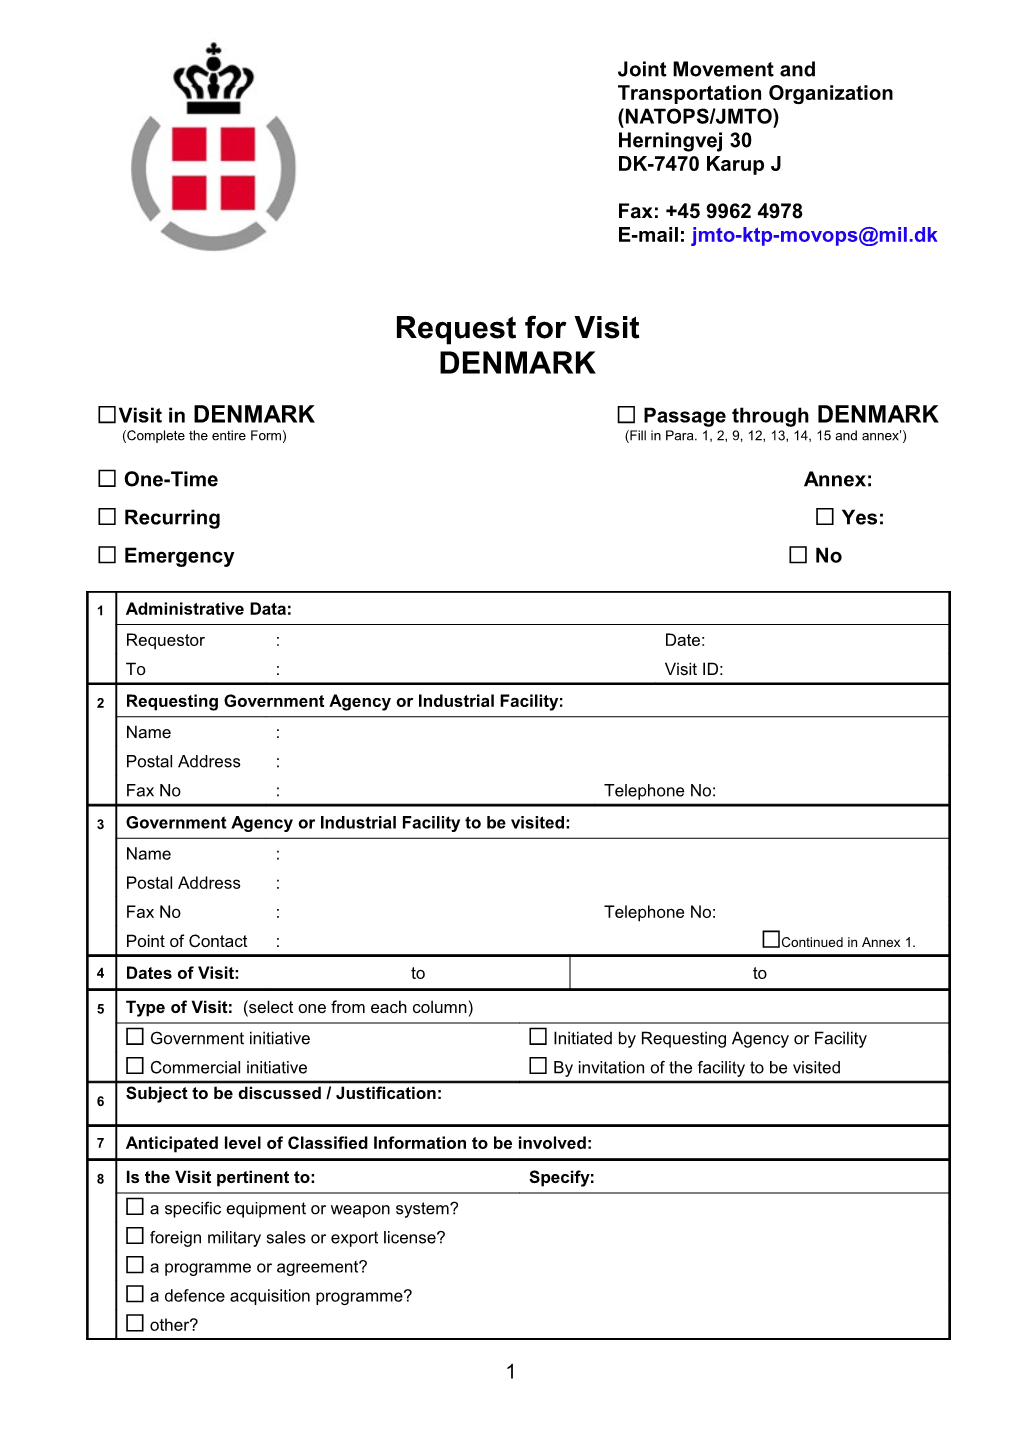 Request for Transit of Denmark